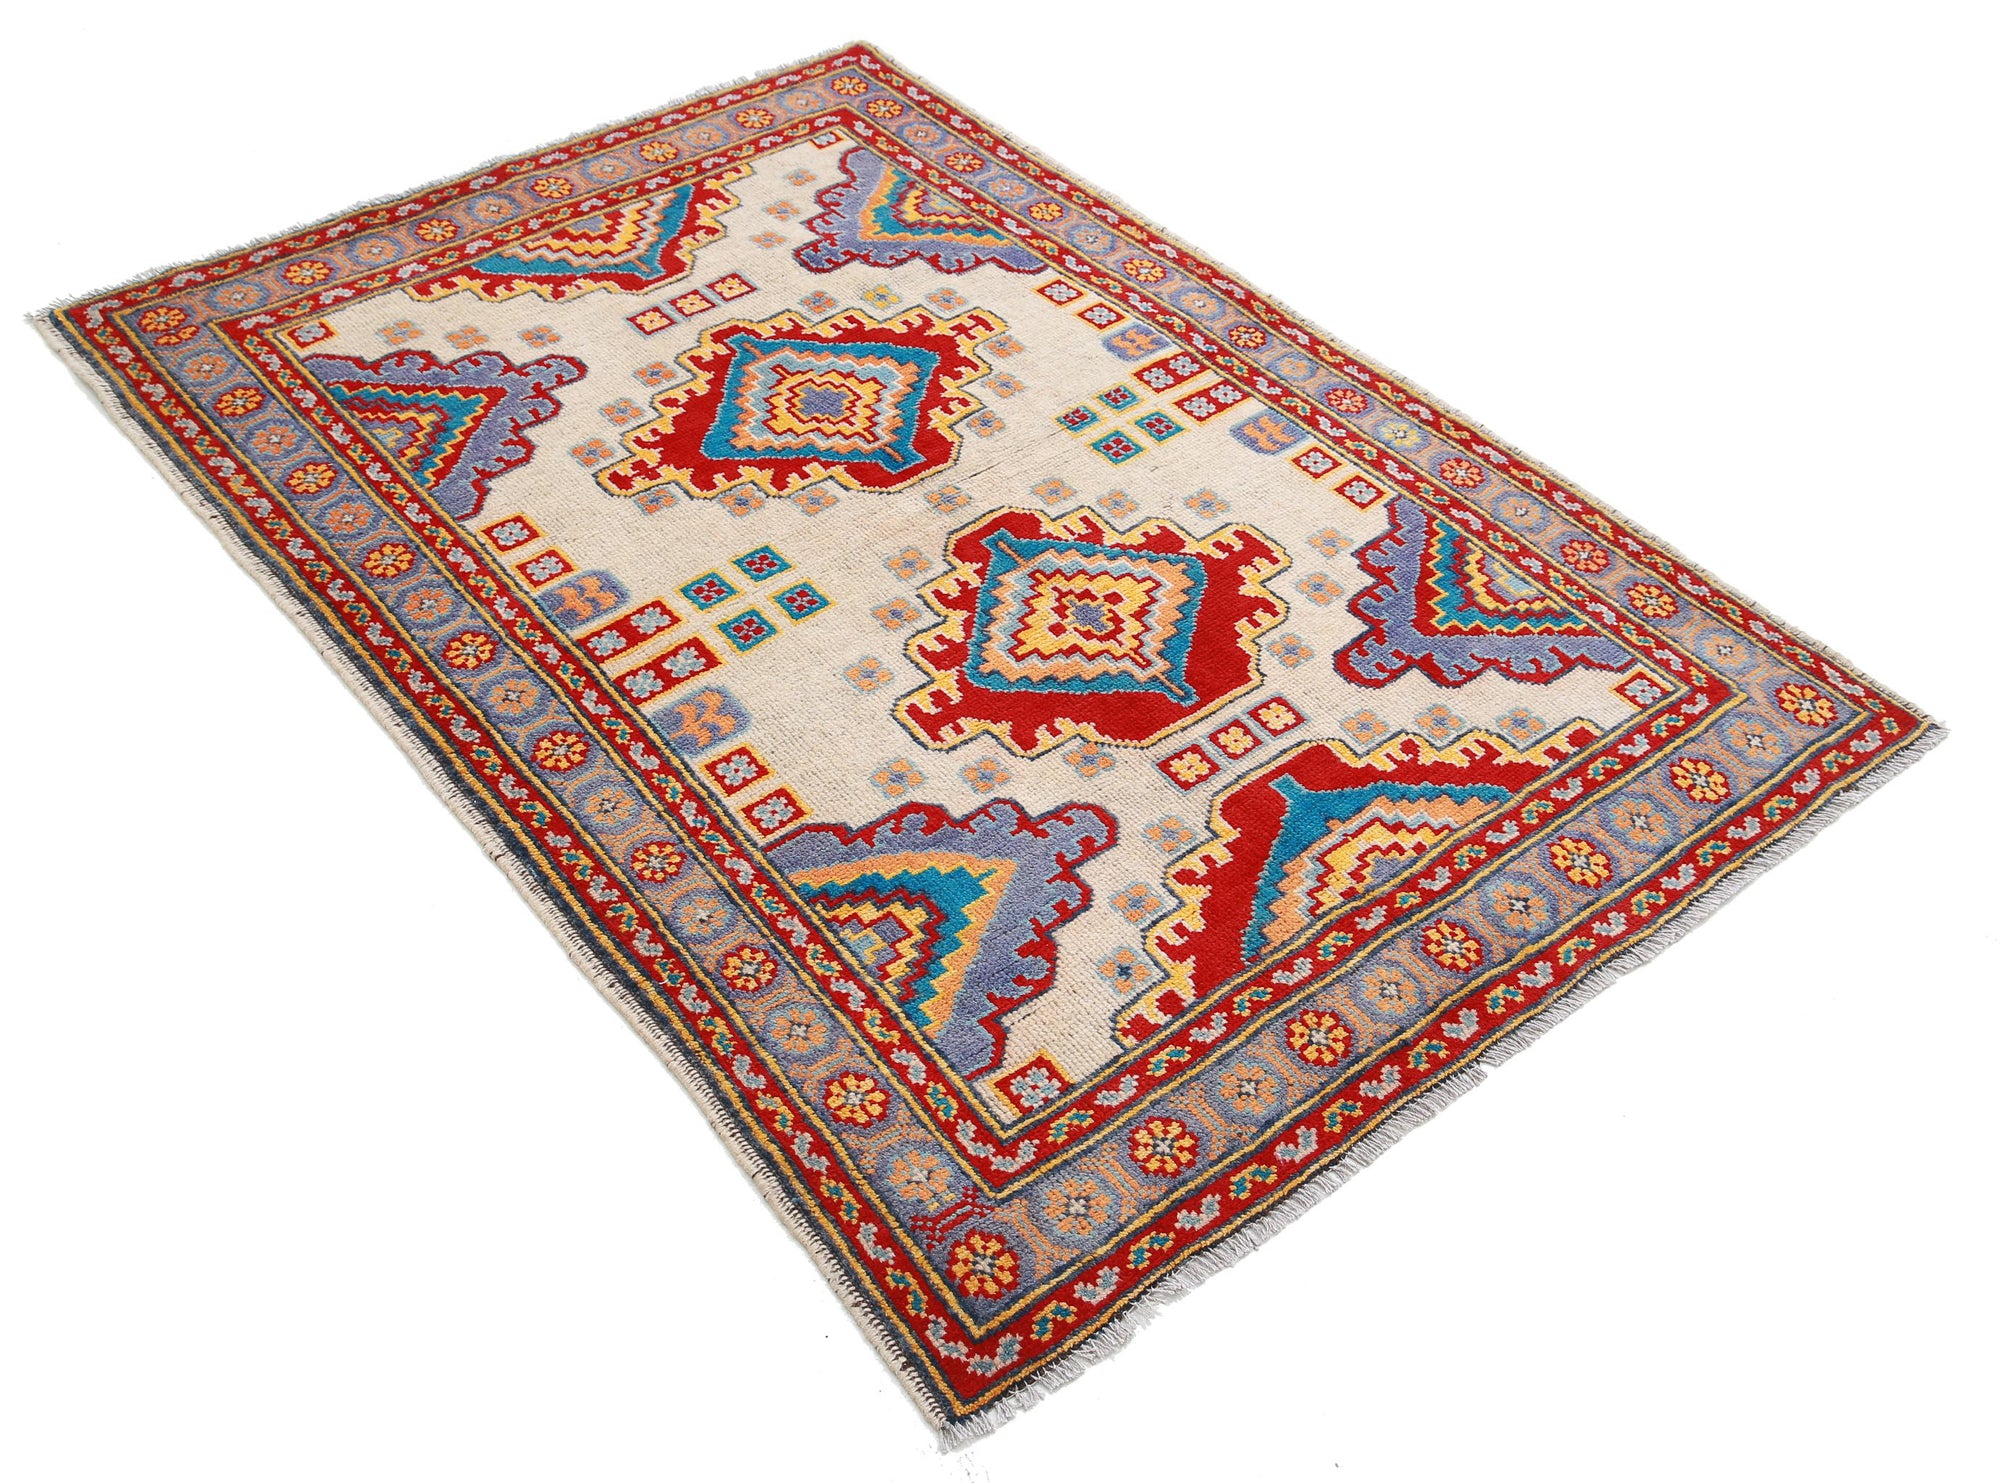 Revival-hand-knotted-qarghani-wool-rug-5014211-1.jpg